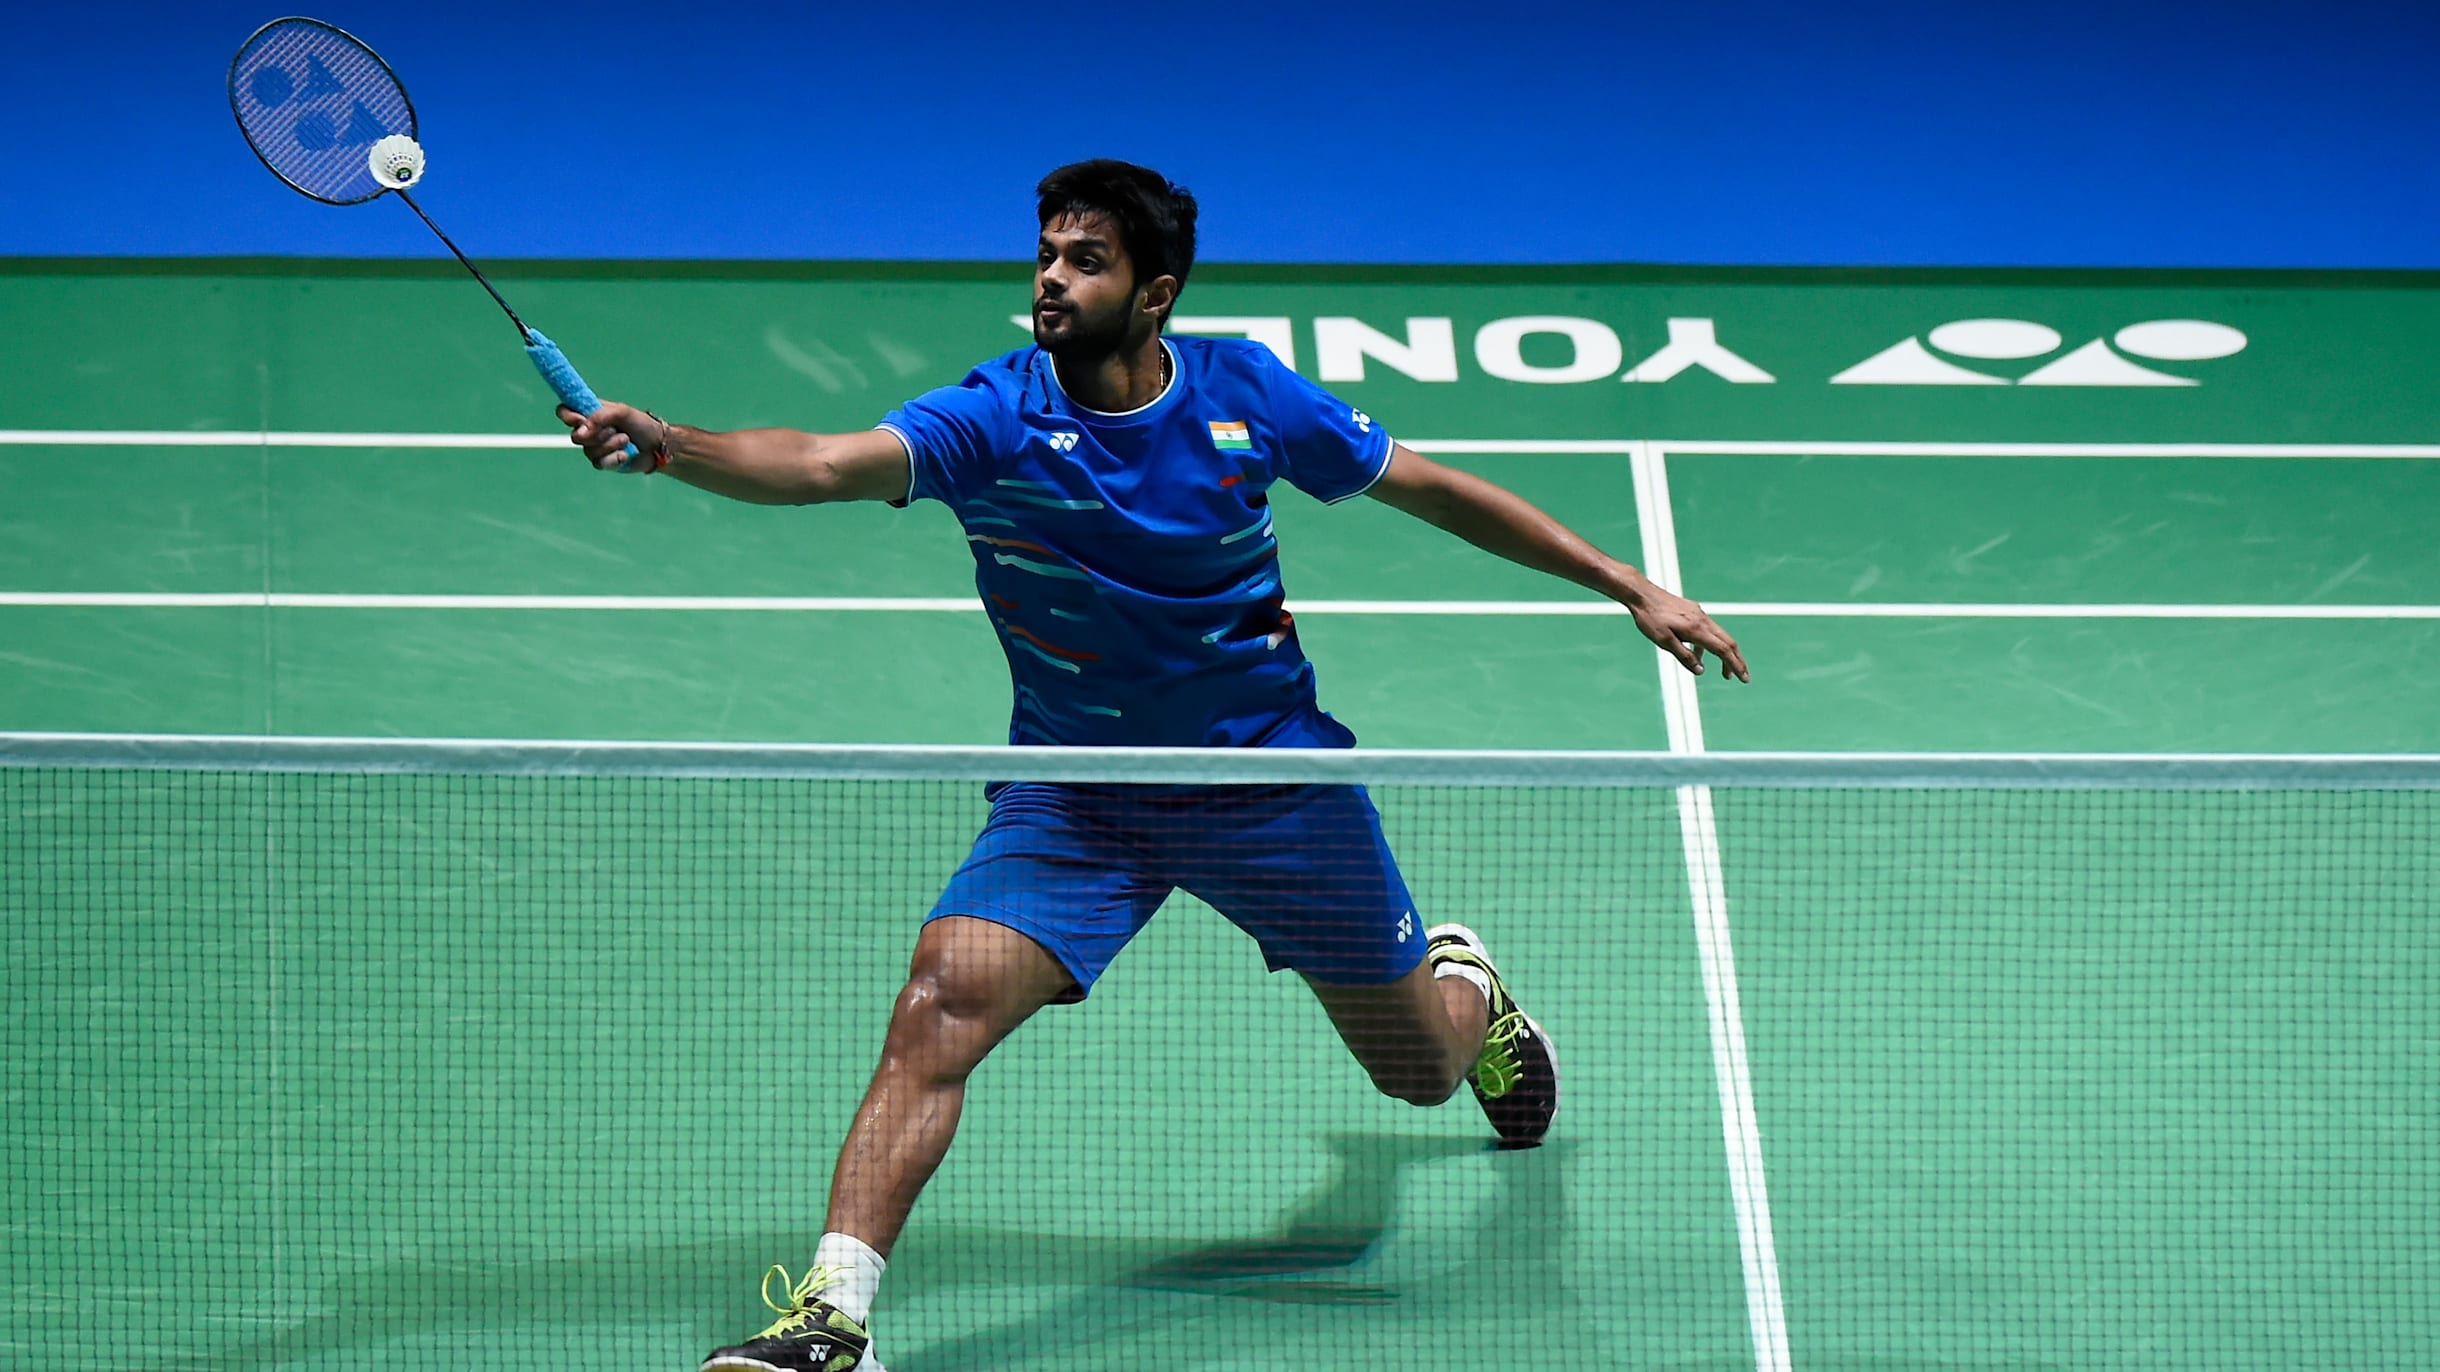 Will Sai Praneeth qualify for Tokyo Olympics badminton knockouts? Watch Sai Praneeth vs Mark Caljouw live streaming and telecast in India